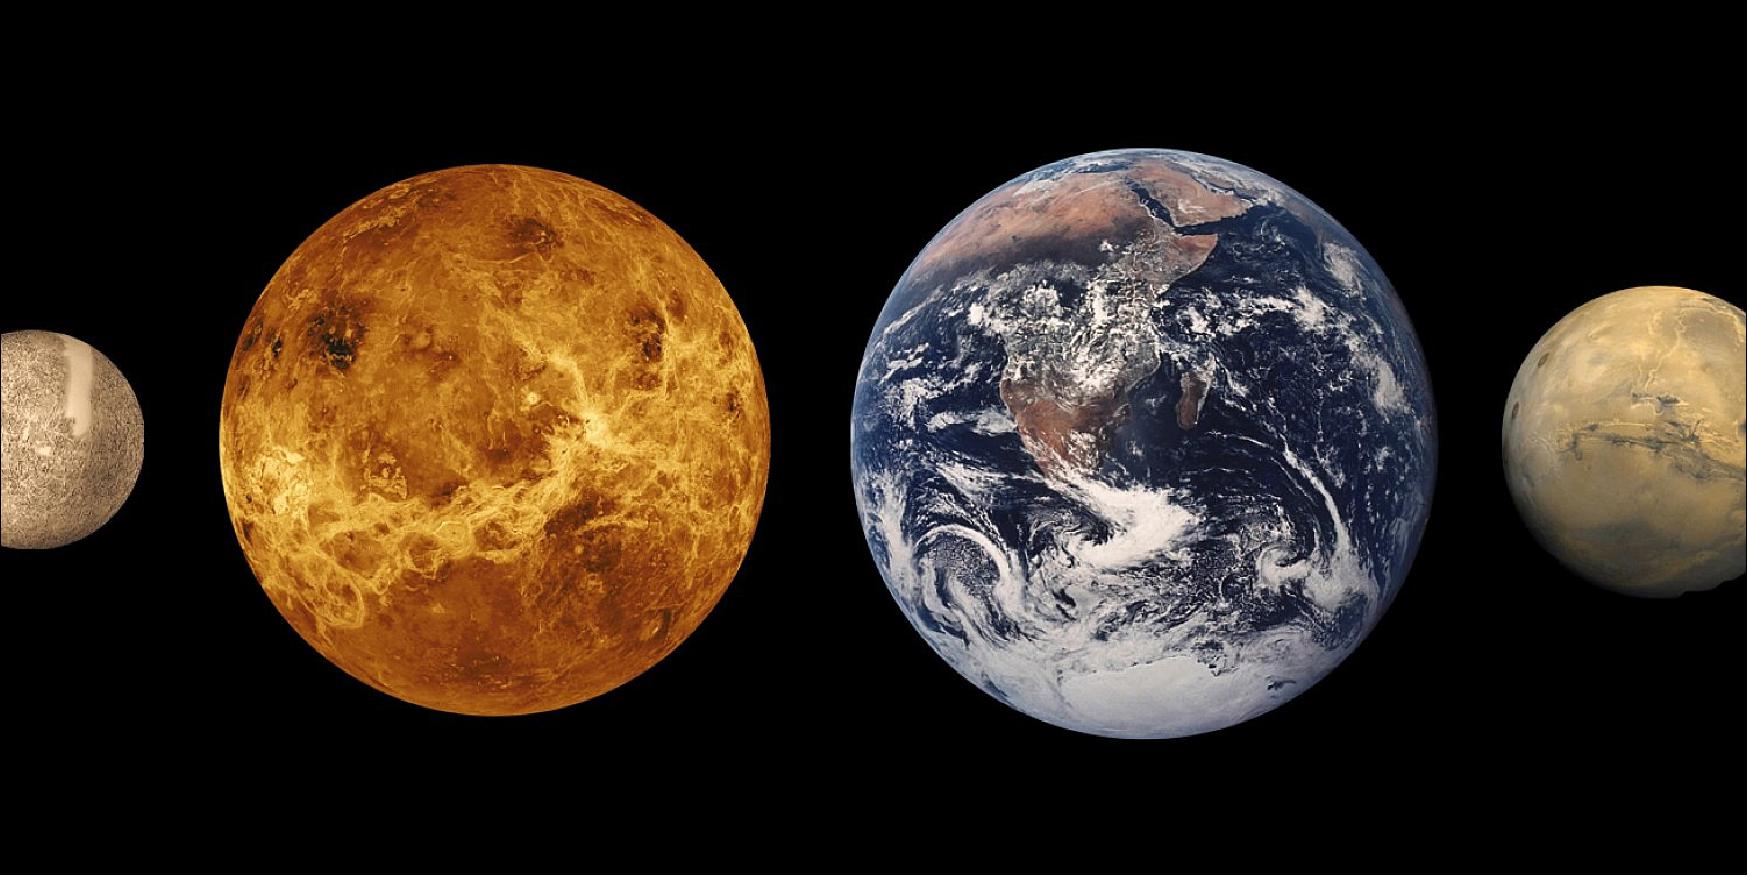 Figure 3: The four terrestrial planets: Mercury, Venus, Earth and Mars (image credit: NASA/Lunar and Planetary Institute)